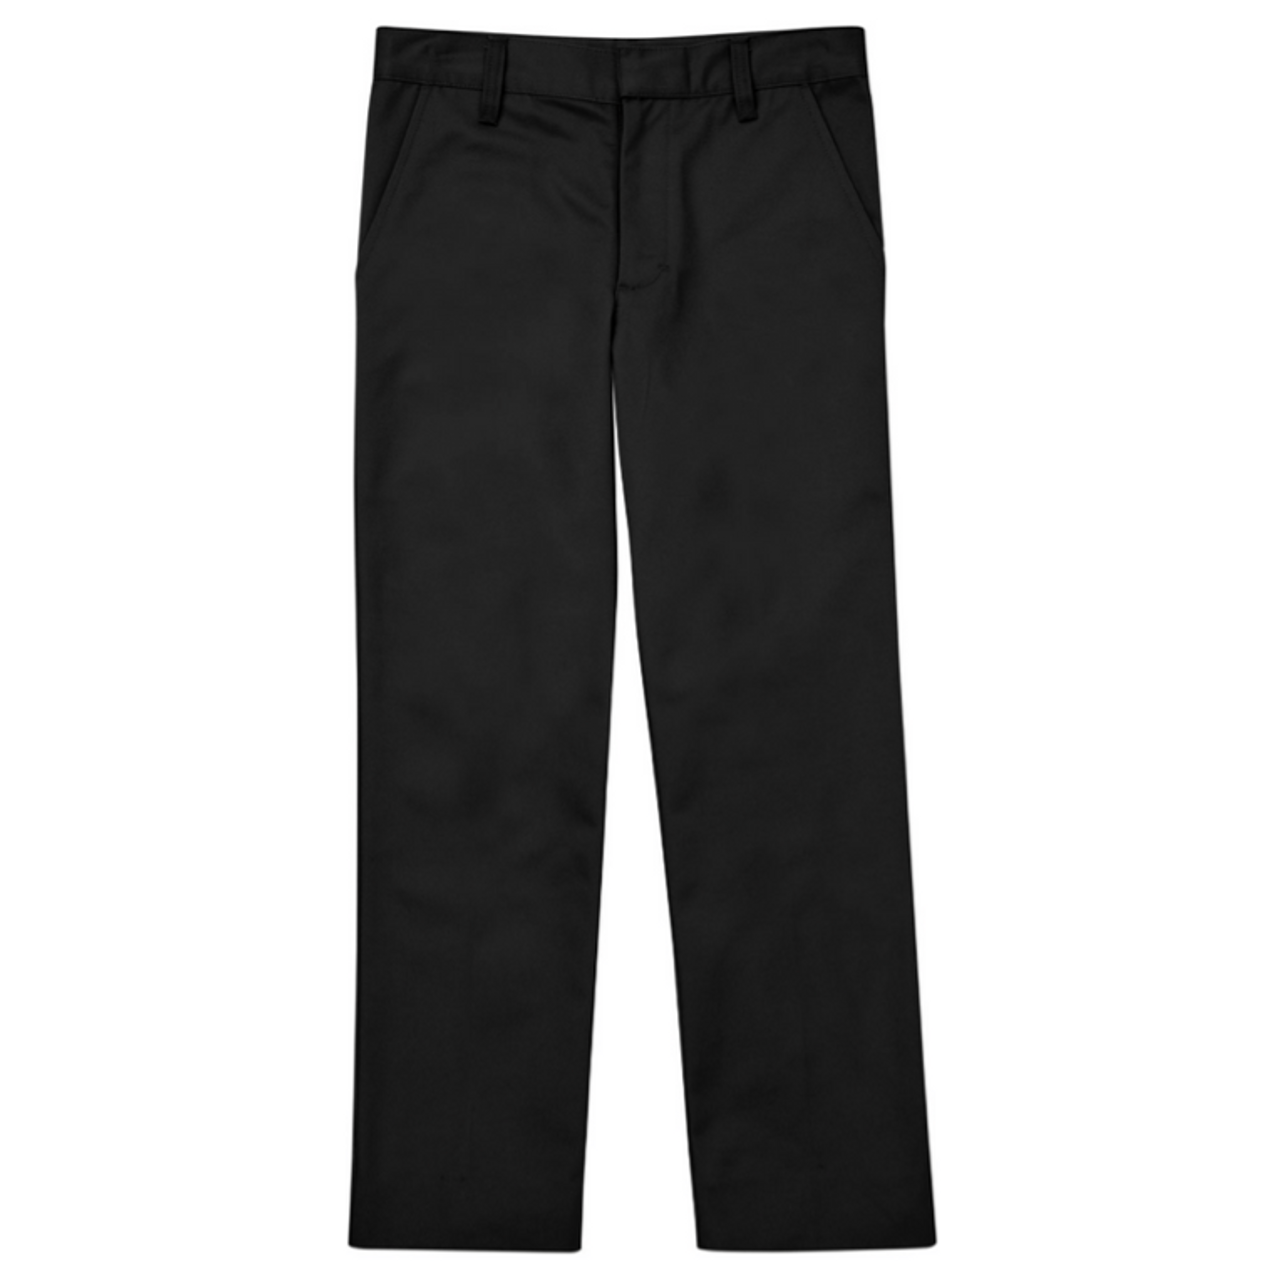 Boys Pant in Black - Educational Outfitters - Boise